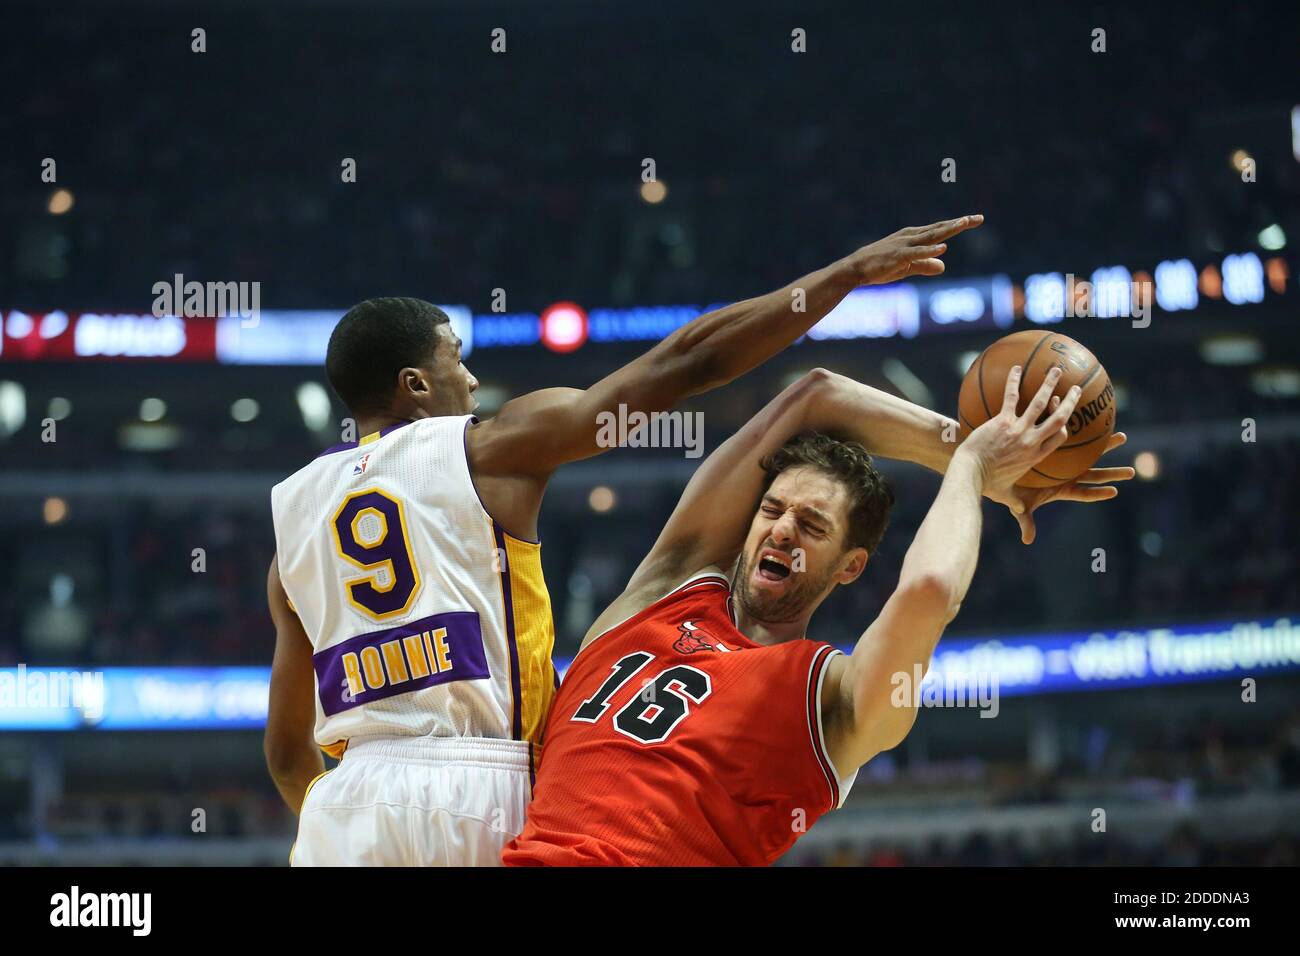 NO FILM, NO VIDEO, NO TV, NO DOCUMENTARY - Los Angeles Lakers guard Ronnie Price (9) fouls Chicago Bulls forward Pau Gasol (16) during the second period on December 25, 2014 at the United Center in Chicago, IL, USA. The Bulls beat the Lakers 113-93. Photo by Armando L. Sanchez/Chicago Tribune/TNS/ABACAPRESS.COM Stock Photo